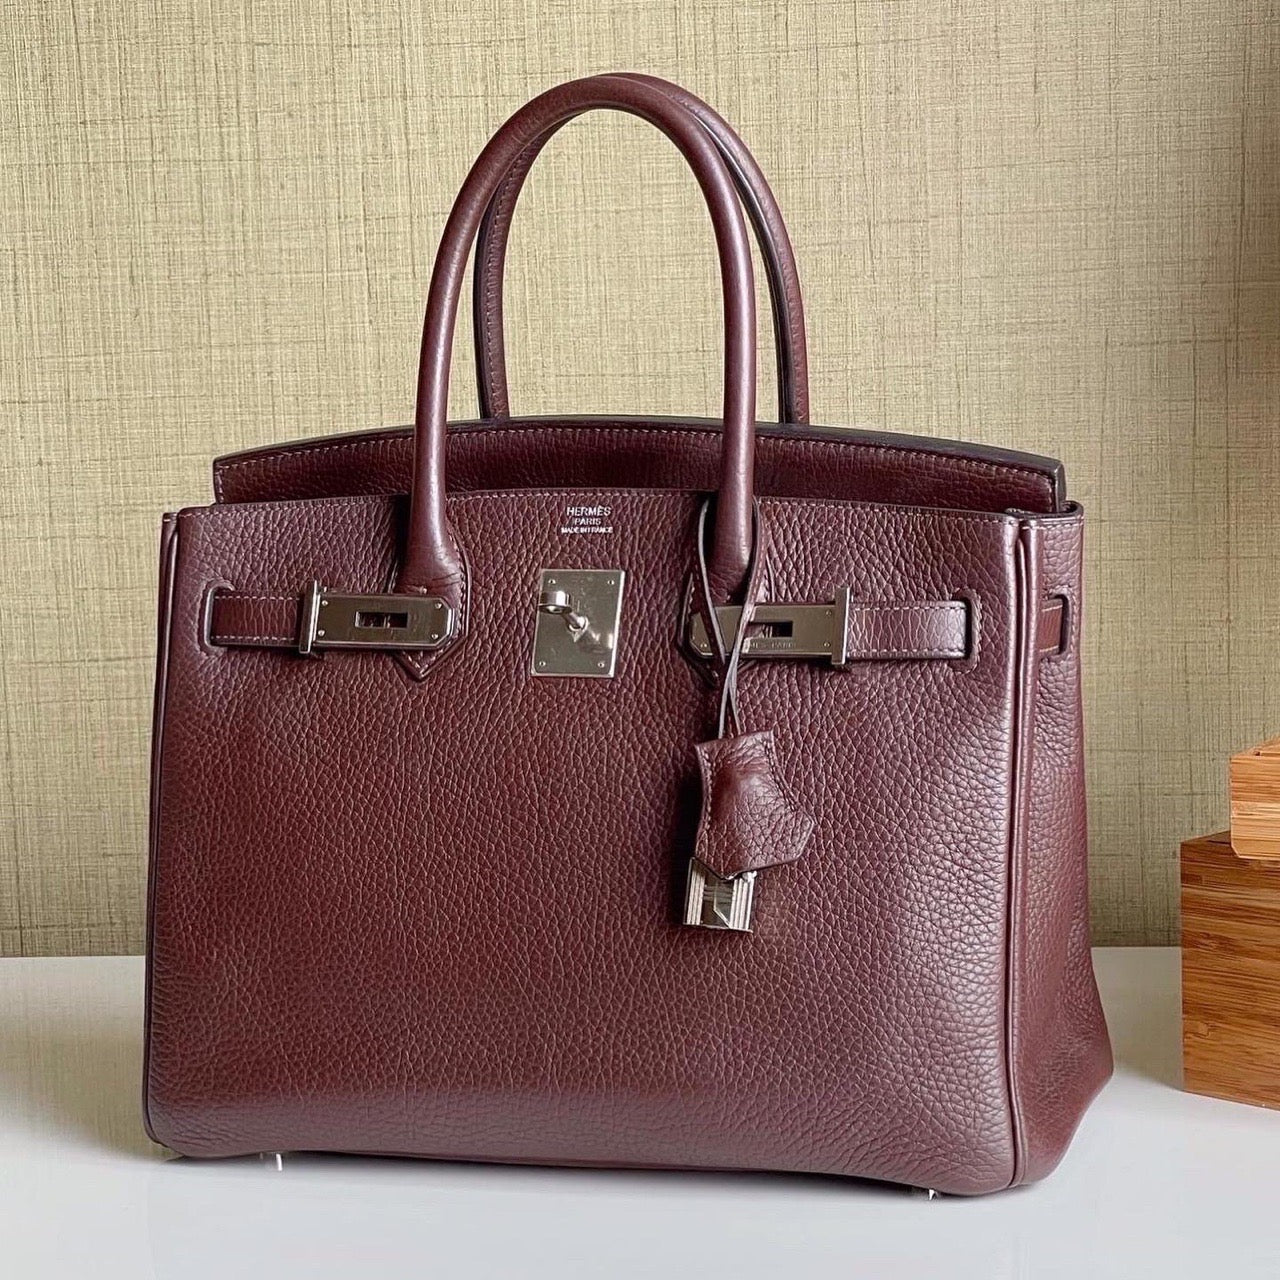 Hermes Birkin bag 30 Cacao Clemence leather Silver hardware